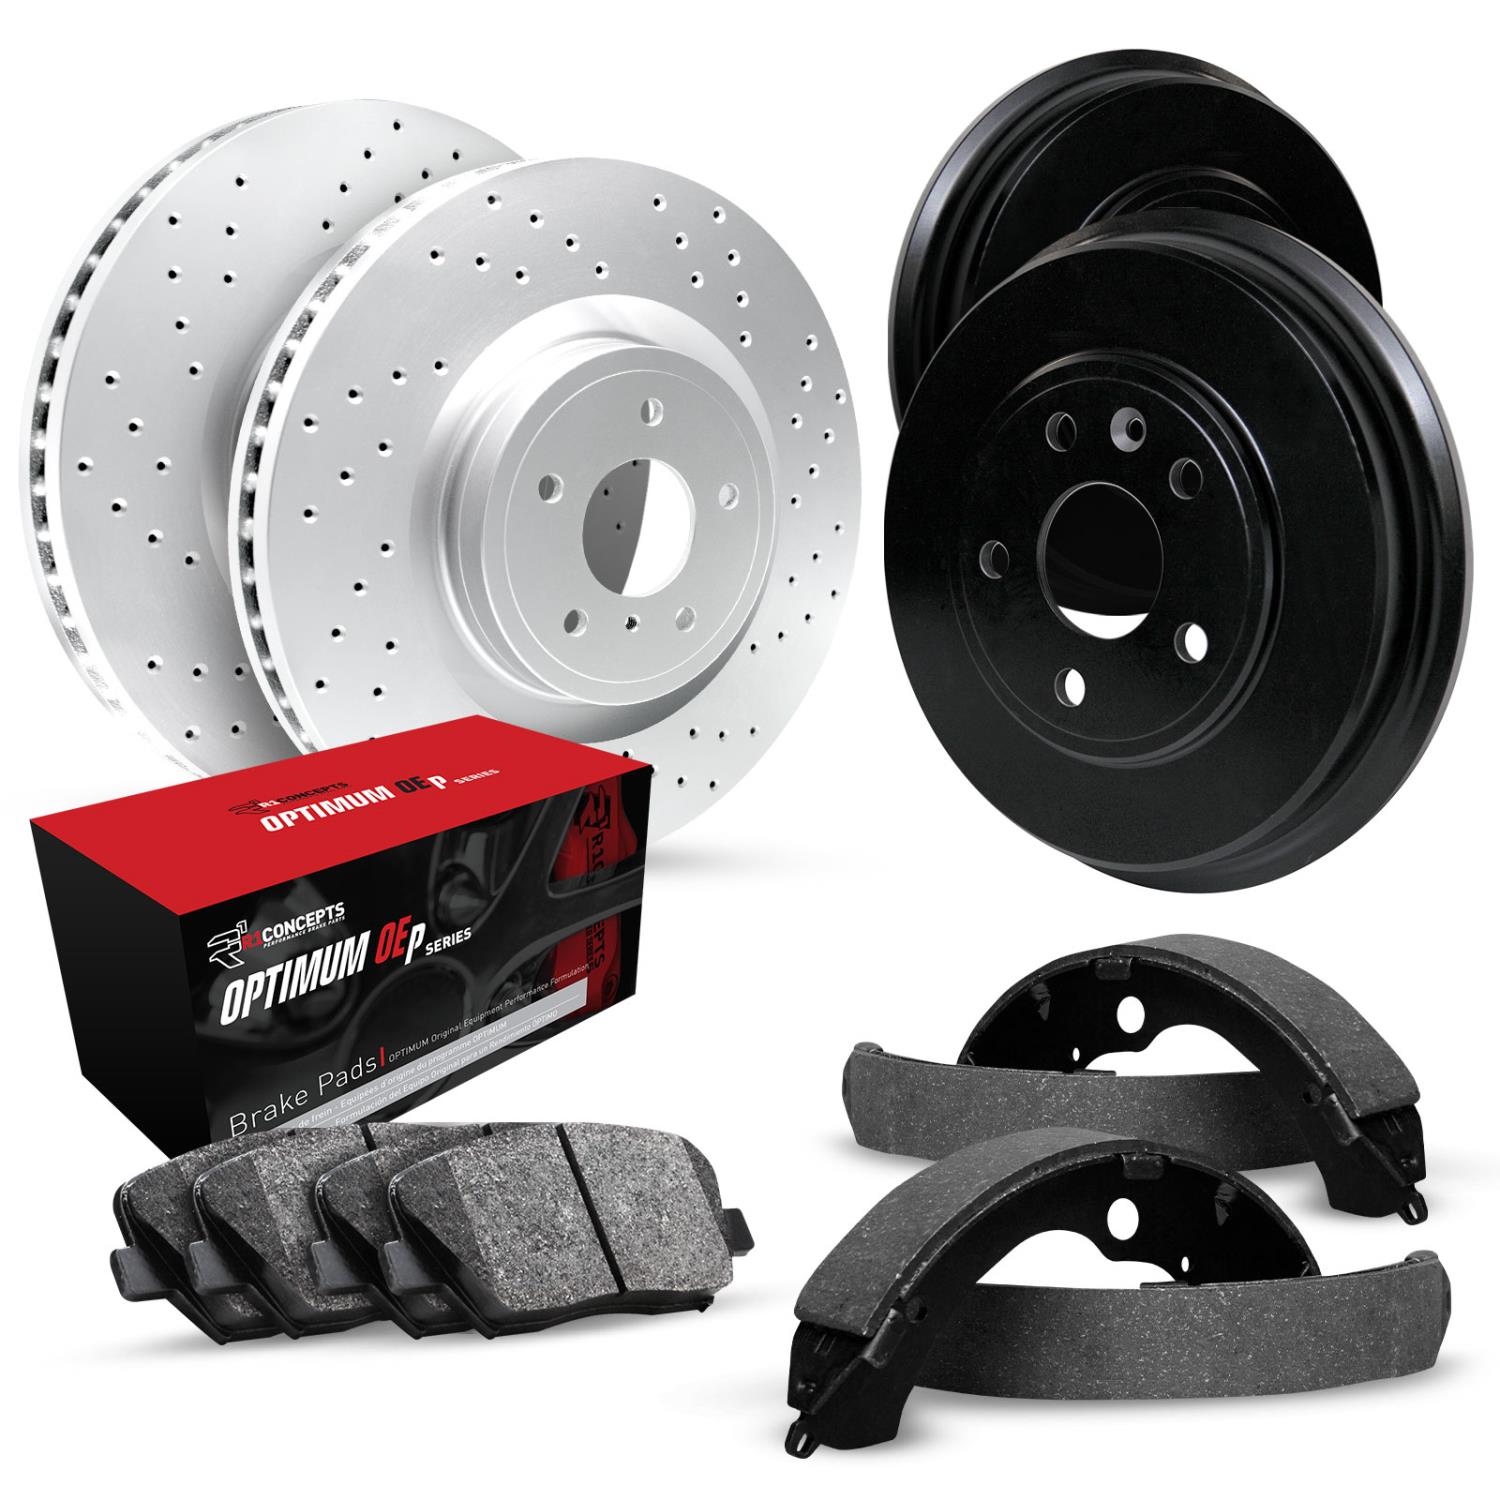 GEO-Carbon Drilled Brake Rotor & Drum Set w/Optimum OE Pads & Shoes, 1997-2005 GM, Position: Front & Rear